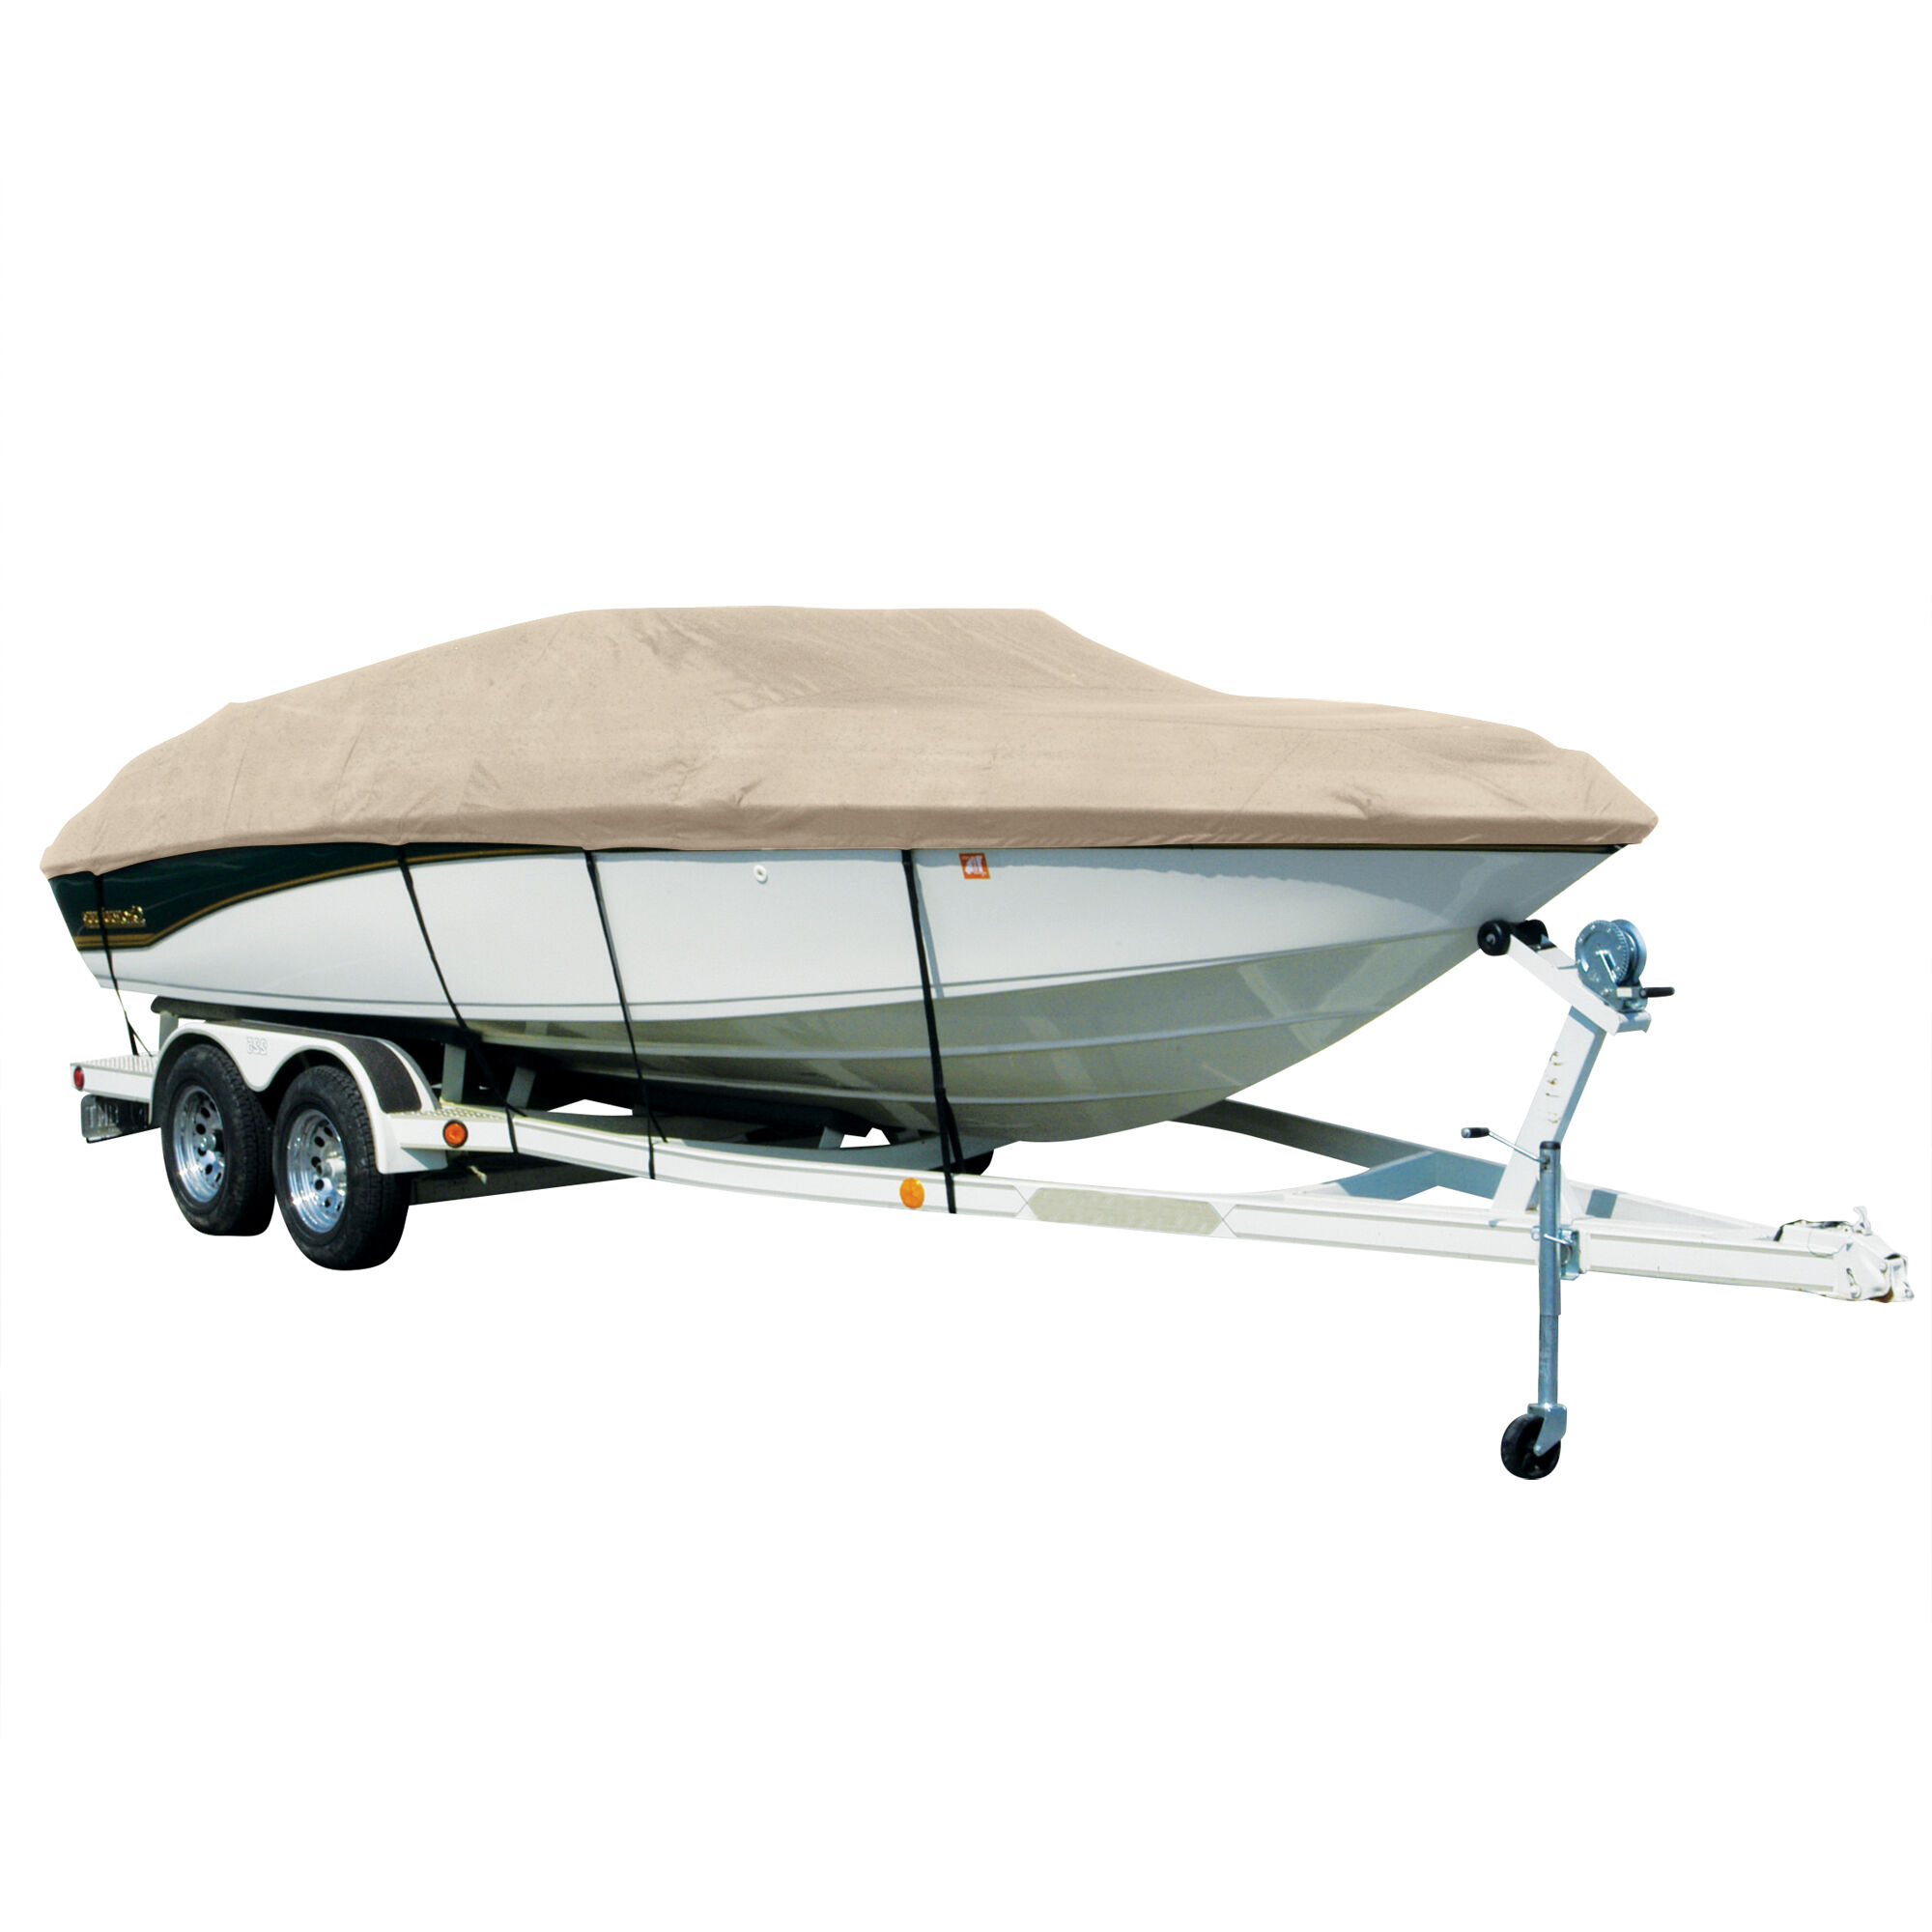 Covermate Hurricane Sharkskin Exact-Fit Nitro Boat Cover Fits 1999-2005 Nitro NX 882 SC Outboard w/ Port Trolling Motor in Linen